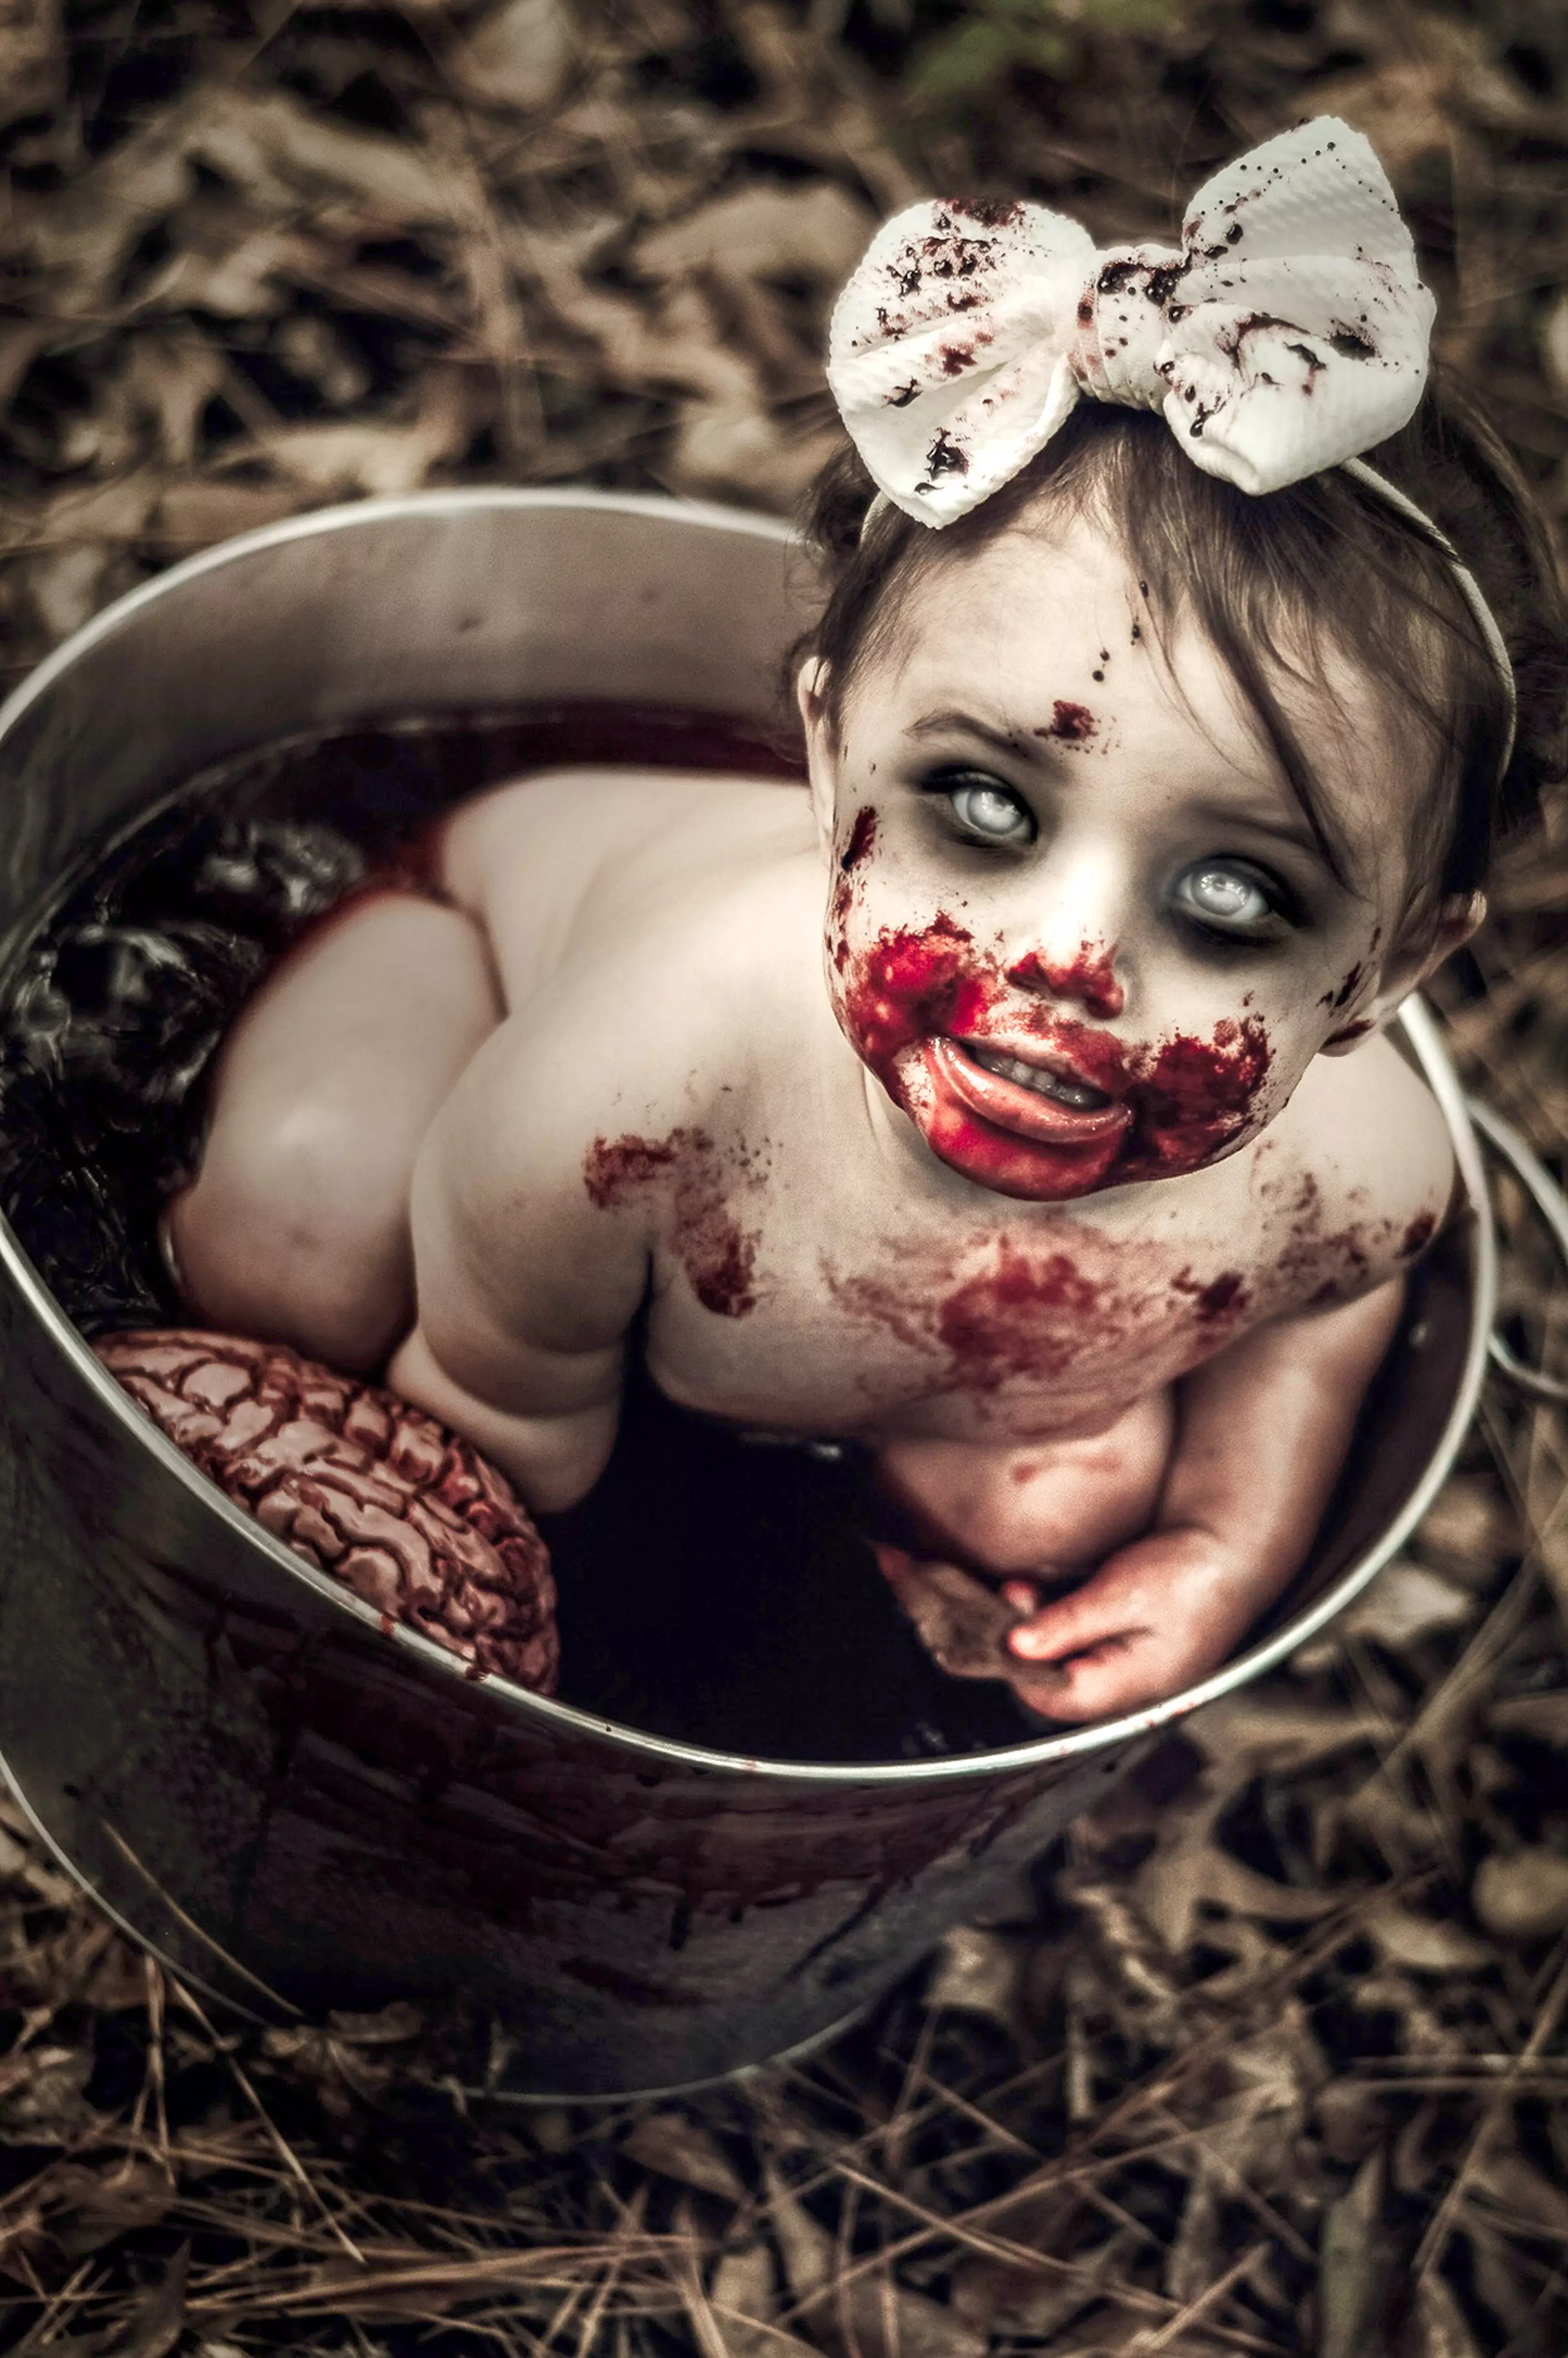 One-year-old Coraline in the horror photoshoot.